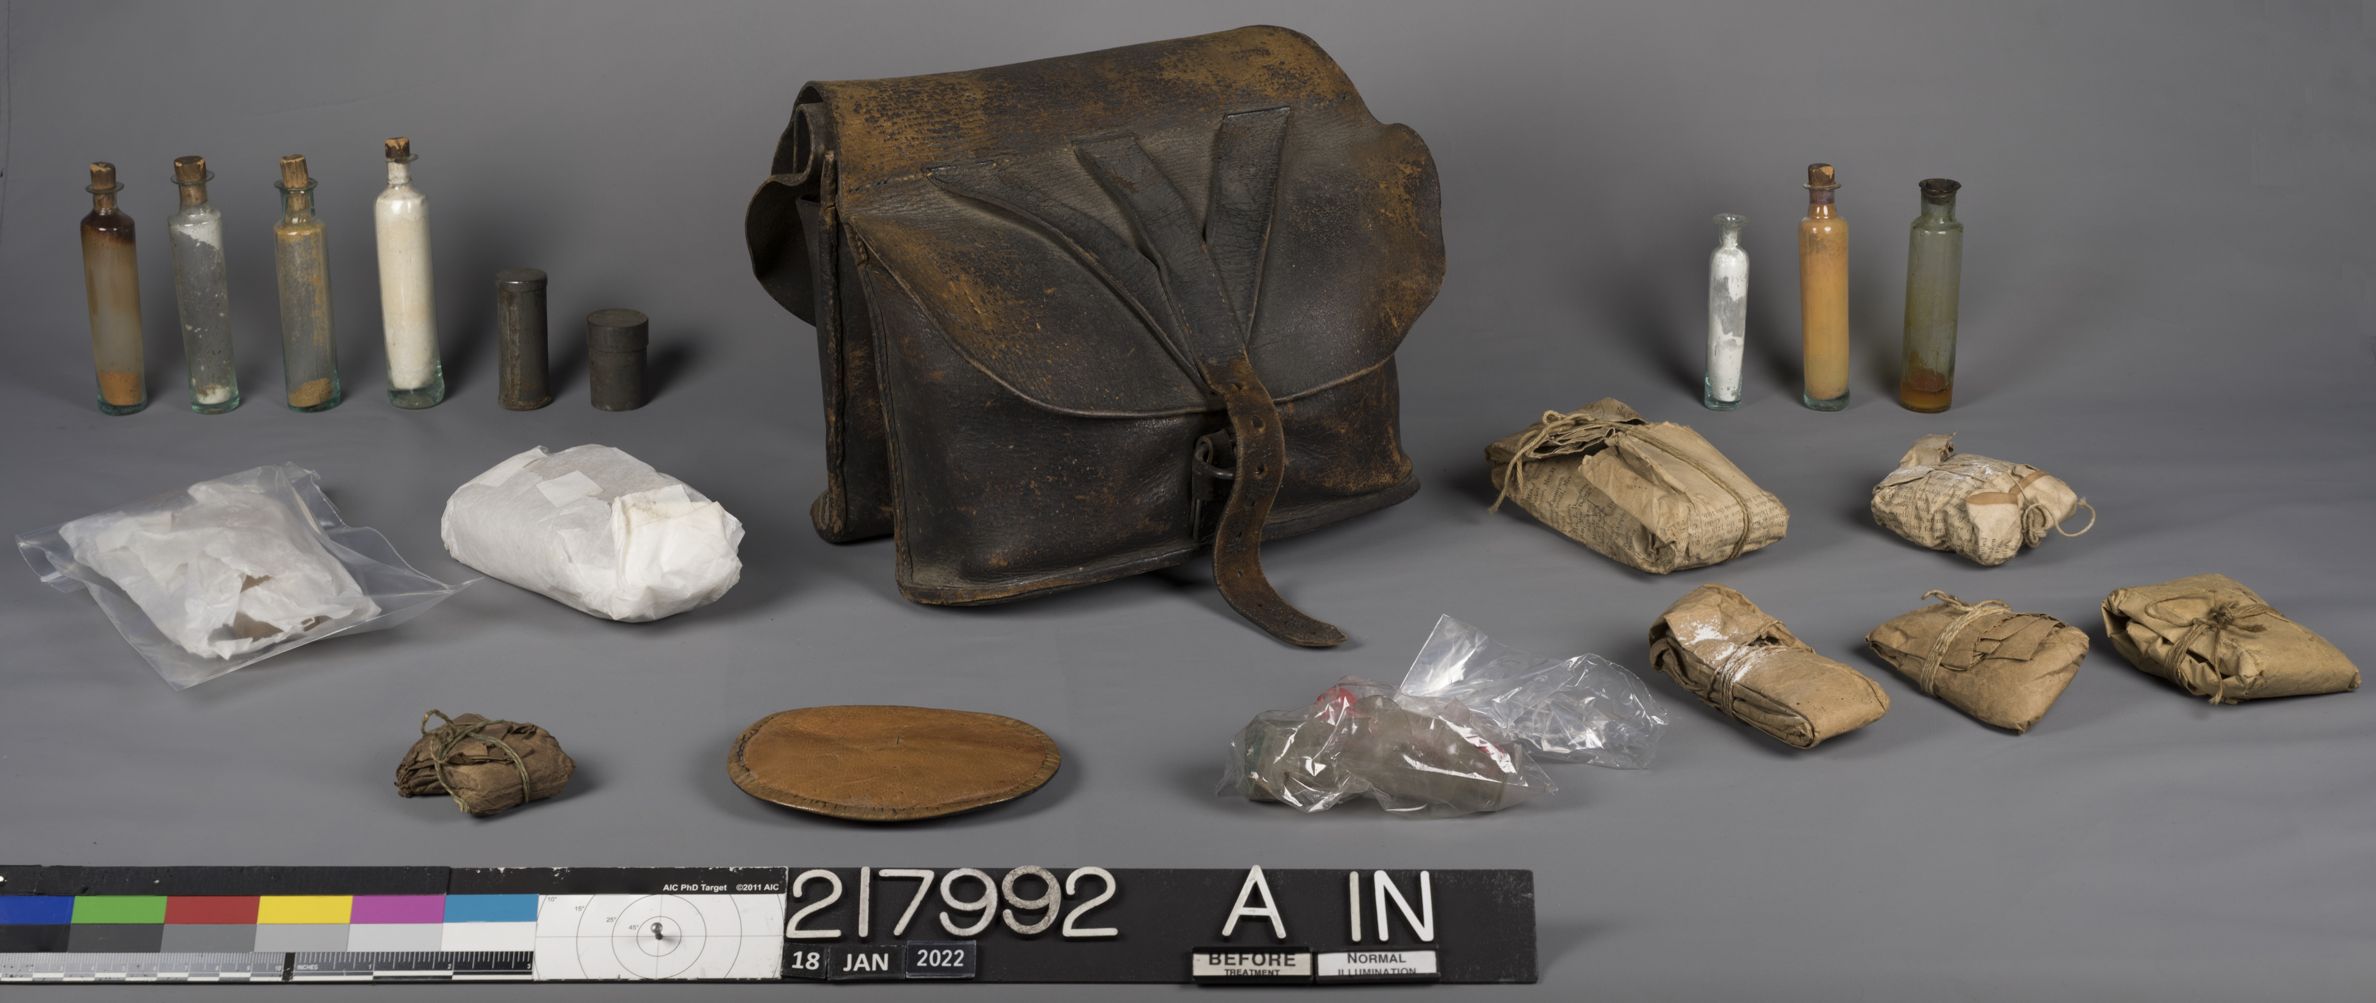 Inventory image, before treatment, of the medical saddlebag and all its contents. Together, there are twenty individual objects.  All images in the article were captured by Lorna Brundrett unless otherwise specified.